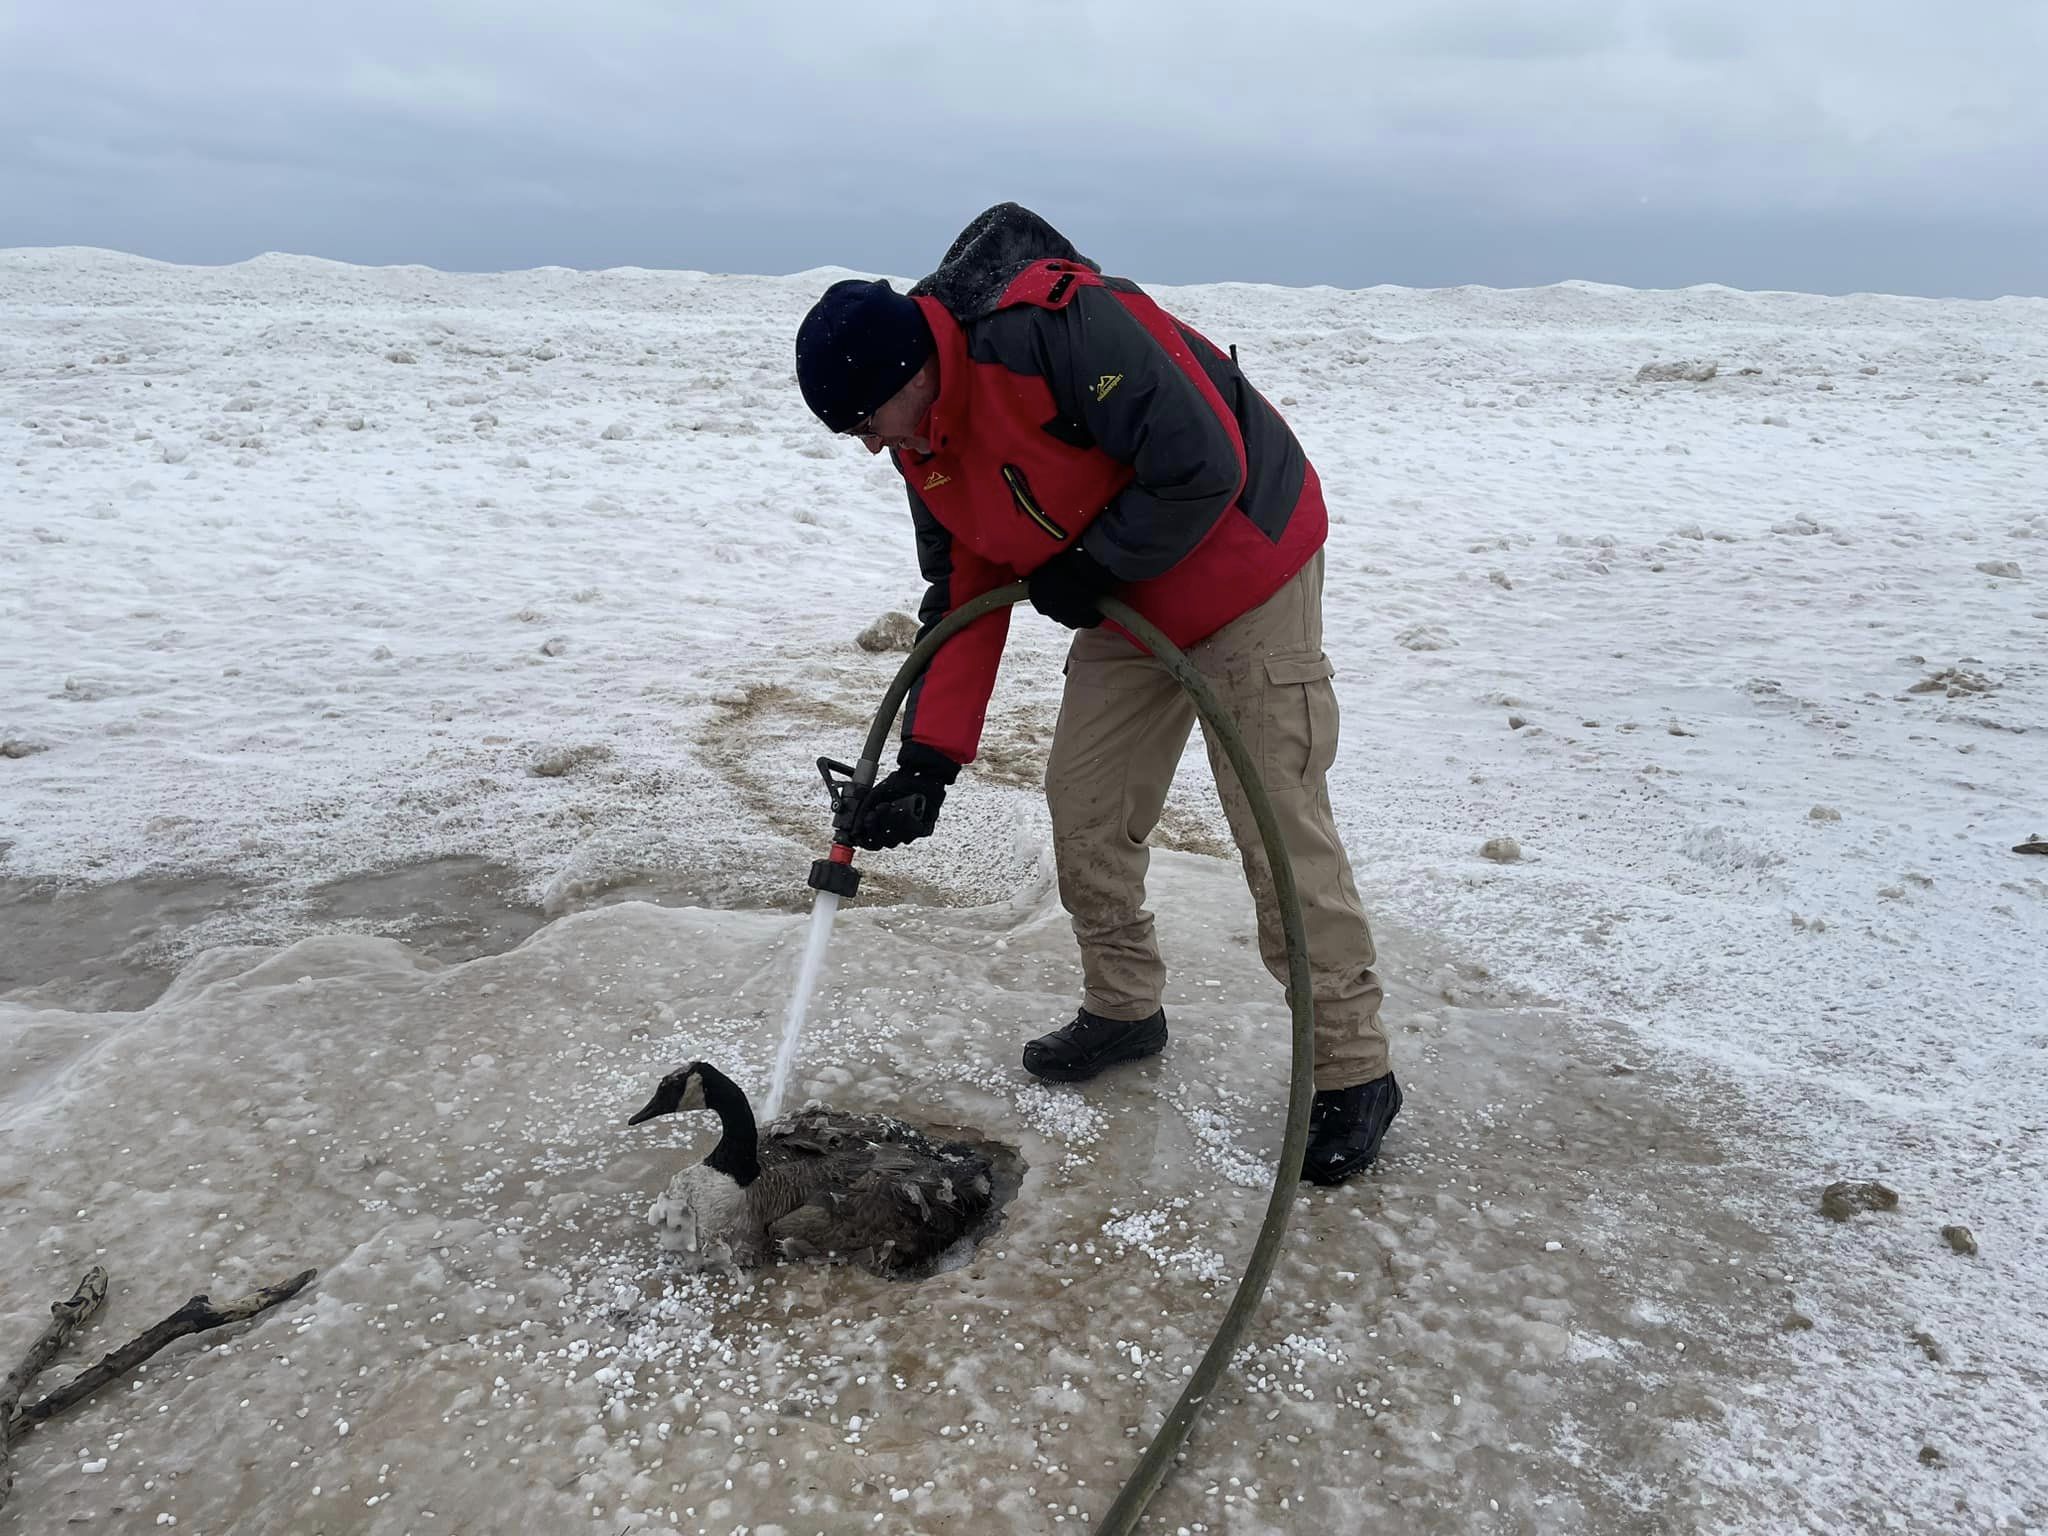 firefighter uses hose to thaw Canada goose frozen to sand in Indiana